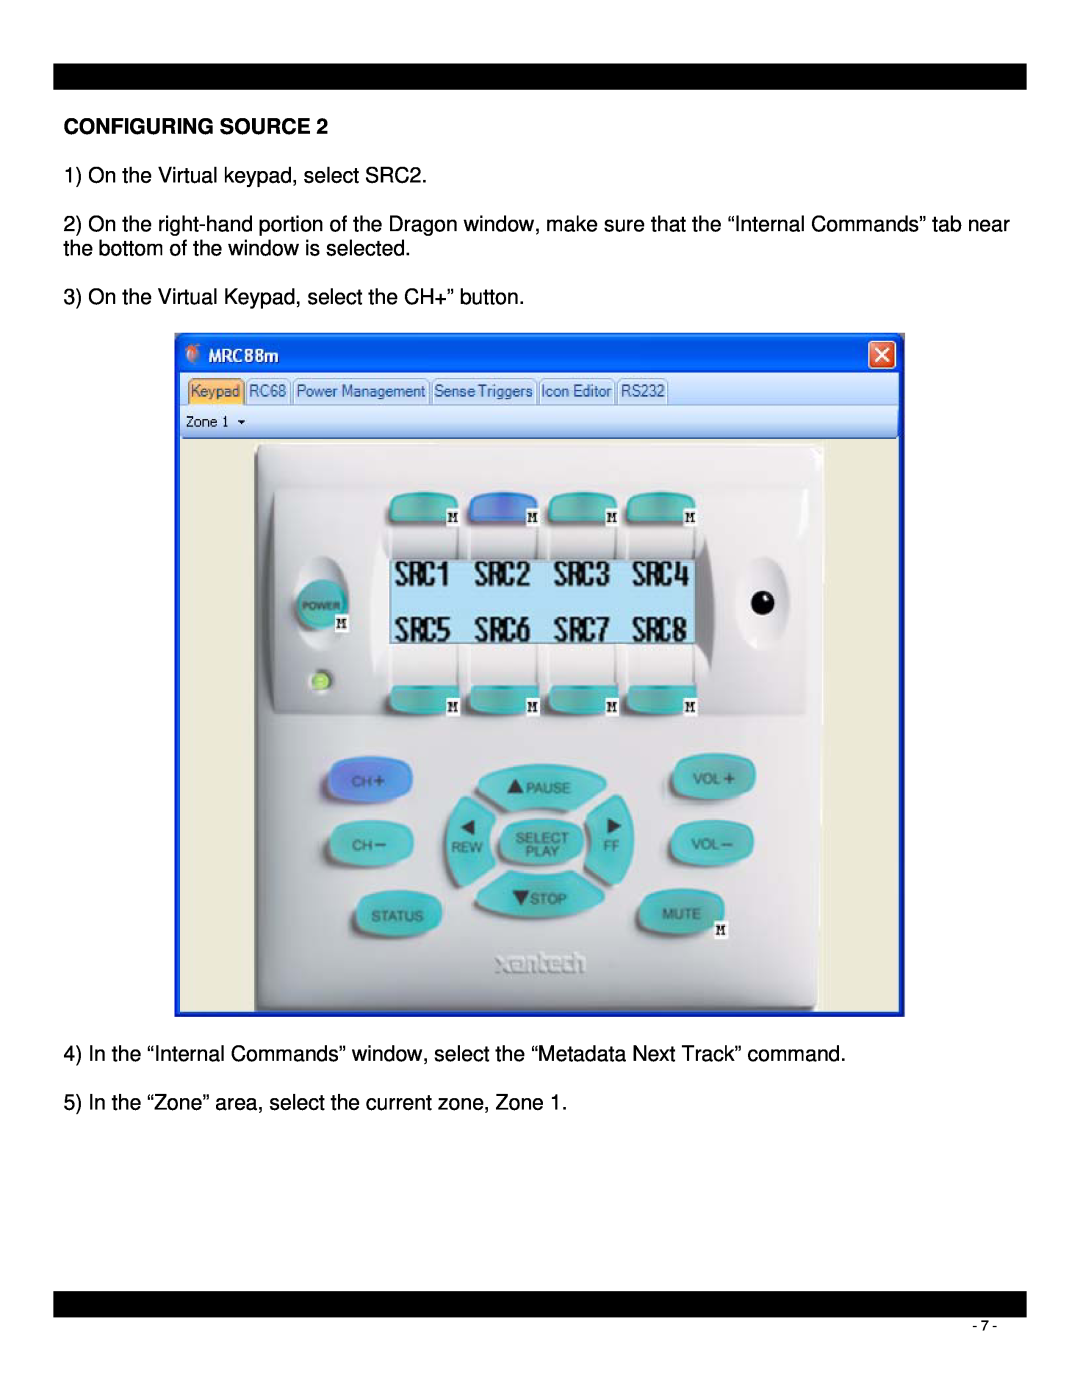 Xantech MRC88M Configuring Source, 1On the Virtual keypad, select SRC2, 3On the Virtual Keypad, select the CH+” button 